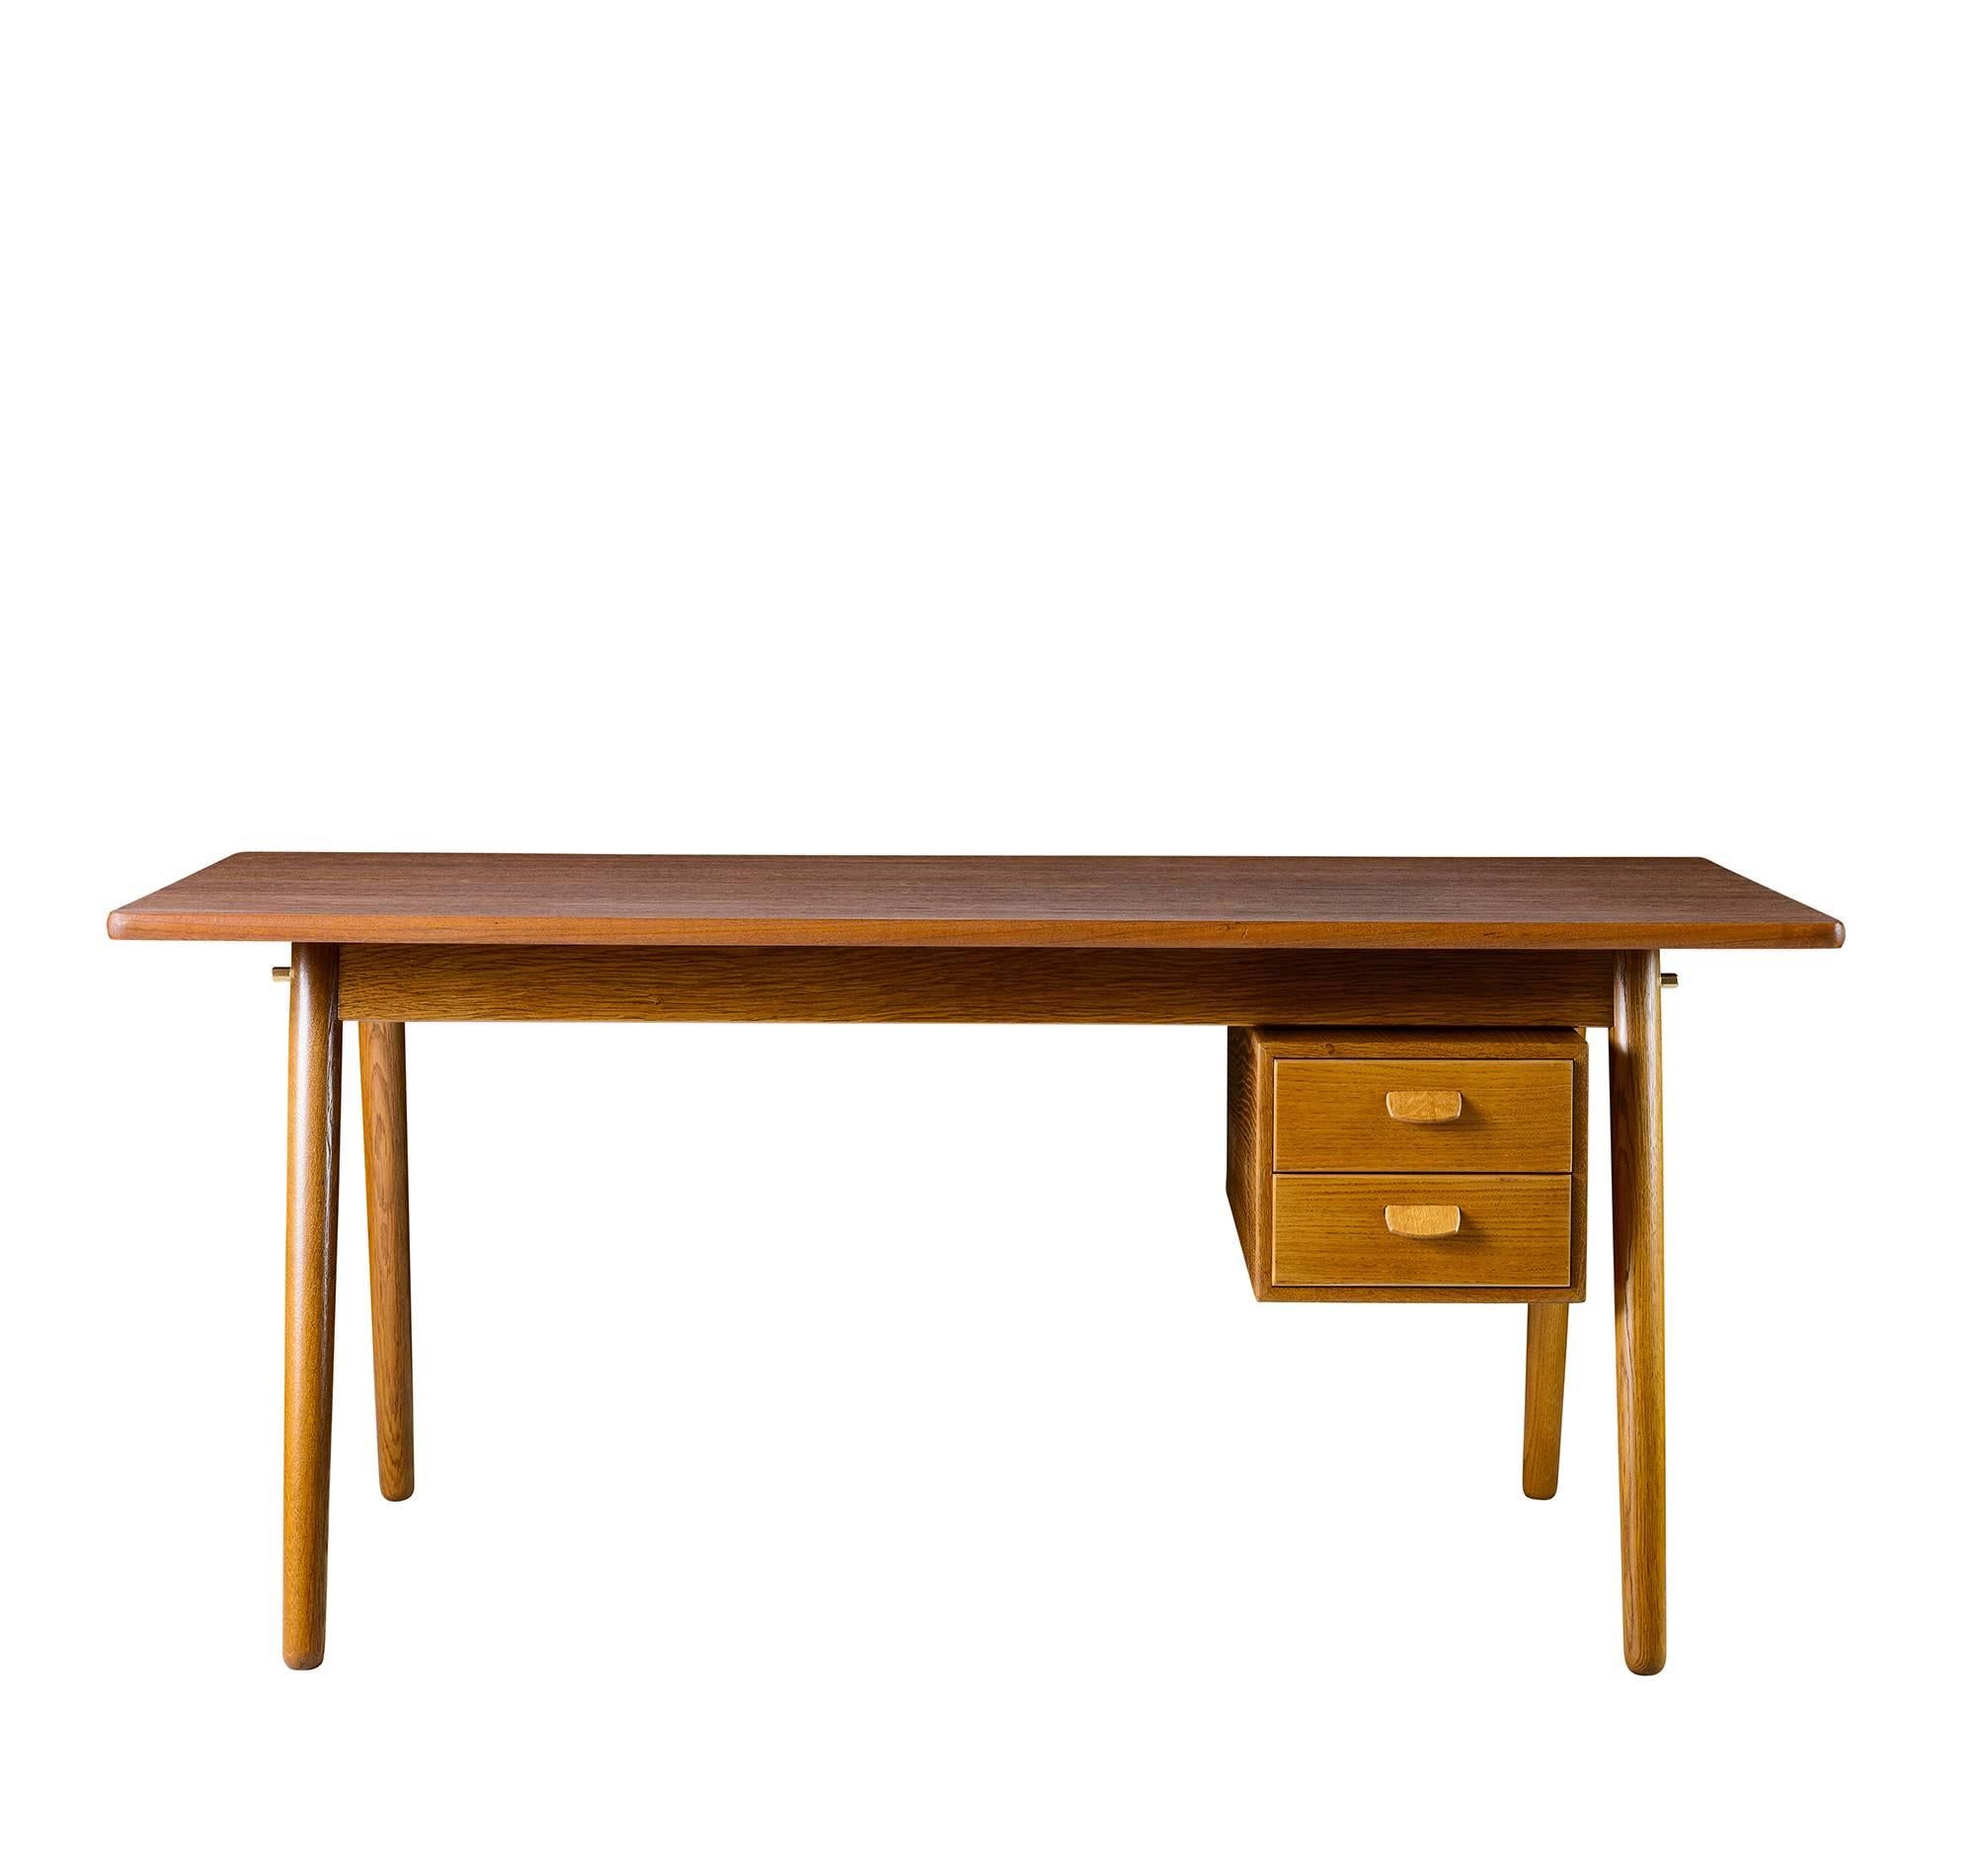 Poul Volther writing desk.